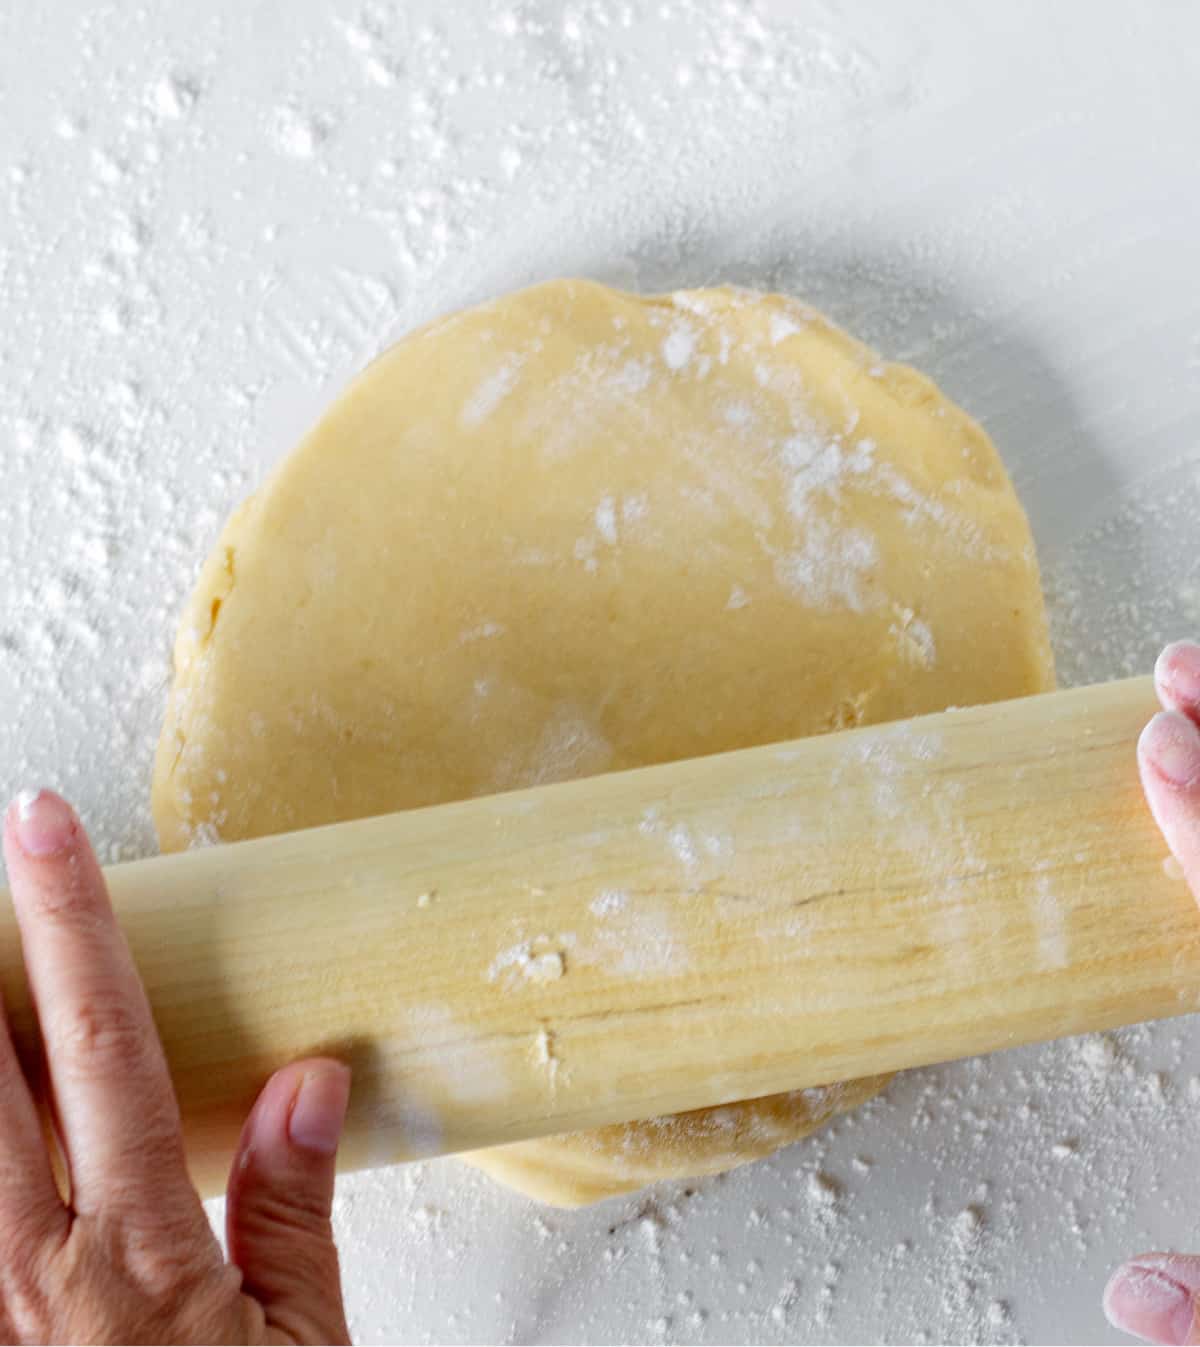 Hands rolling disc of dough with pin on white surface.